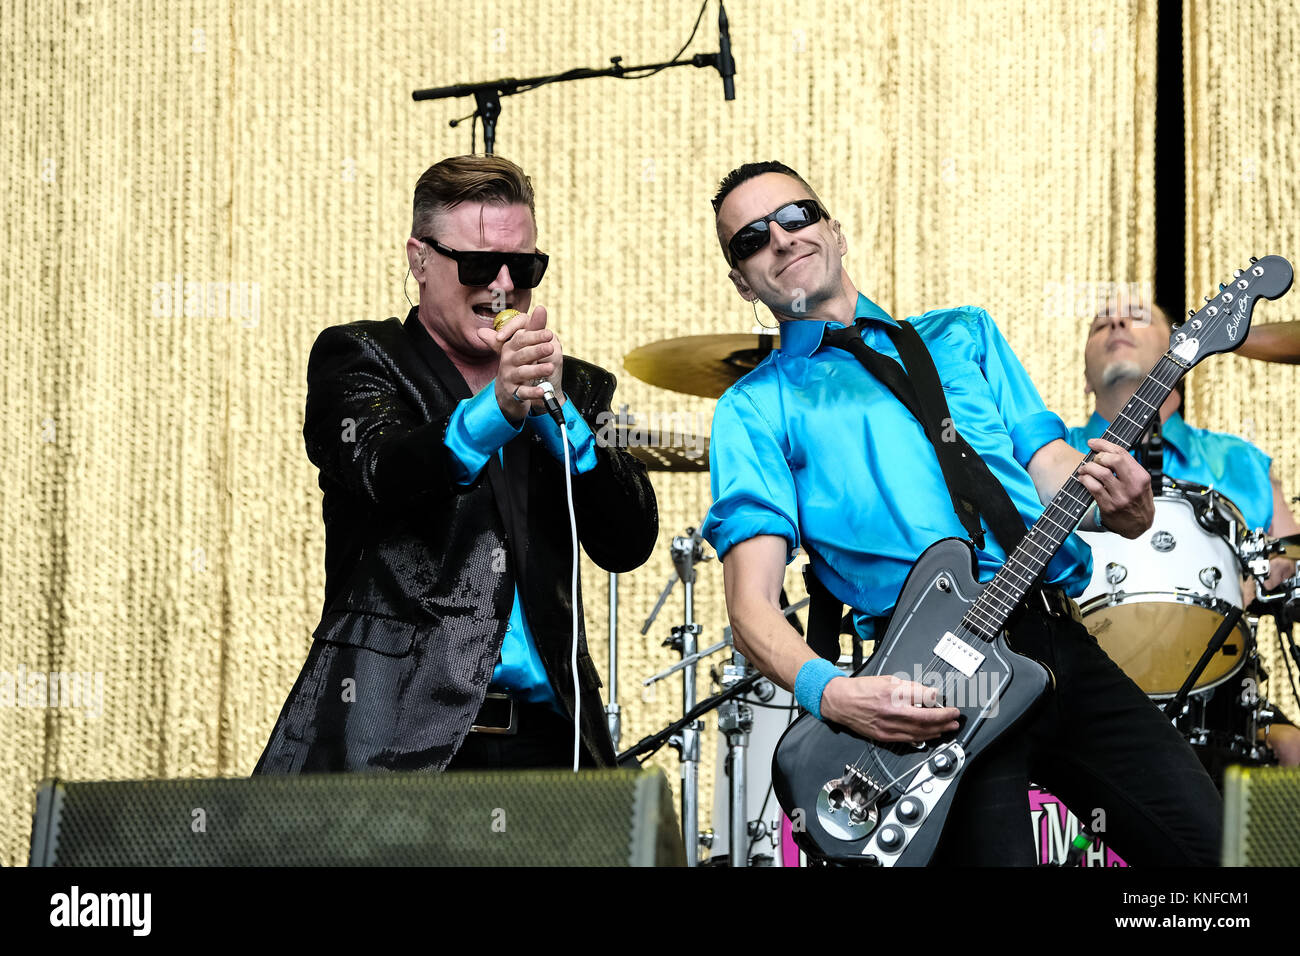 The American punk rock and cover band Me First and the Gimme Gimmes  performs a live concert at the Swiss music festival Greenfield Festival  2017 in Interlaken. Here vocalist Spike Slawson is